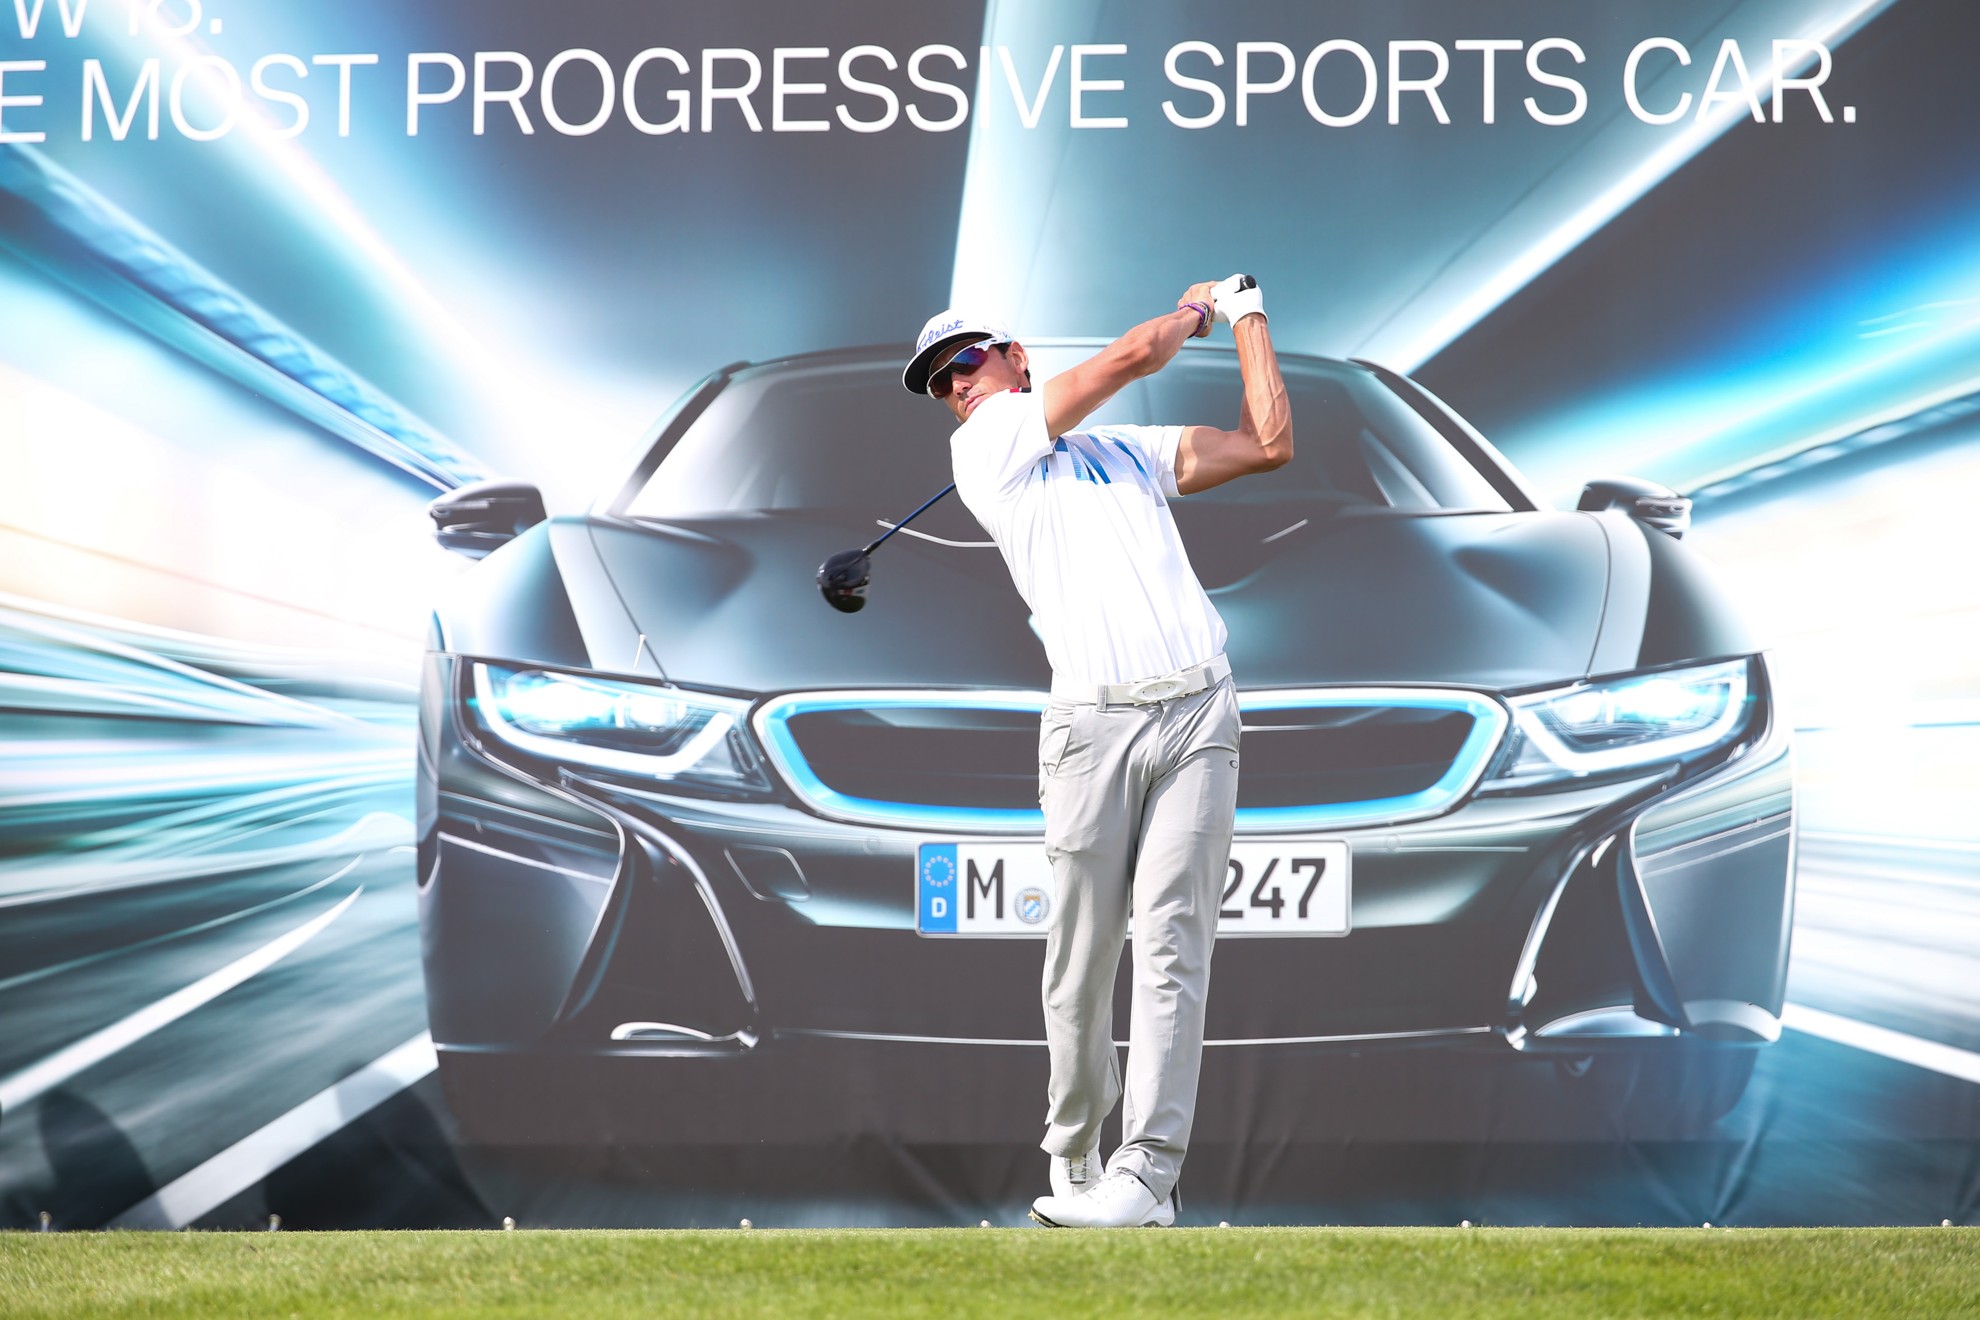 BMW International Golf Open: England and Spain lead the way after day one.